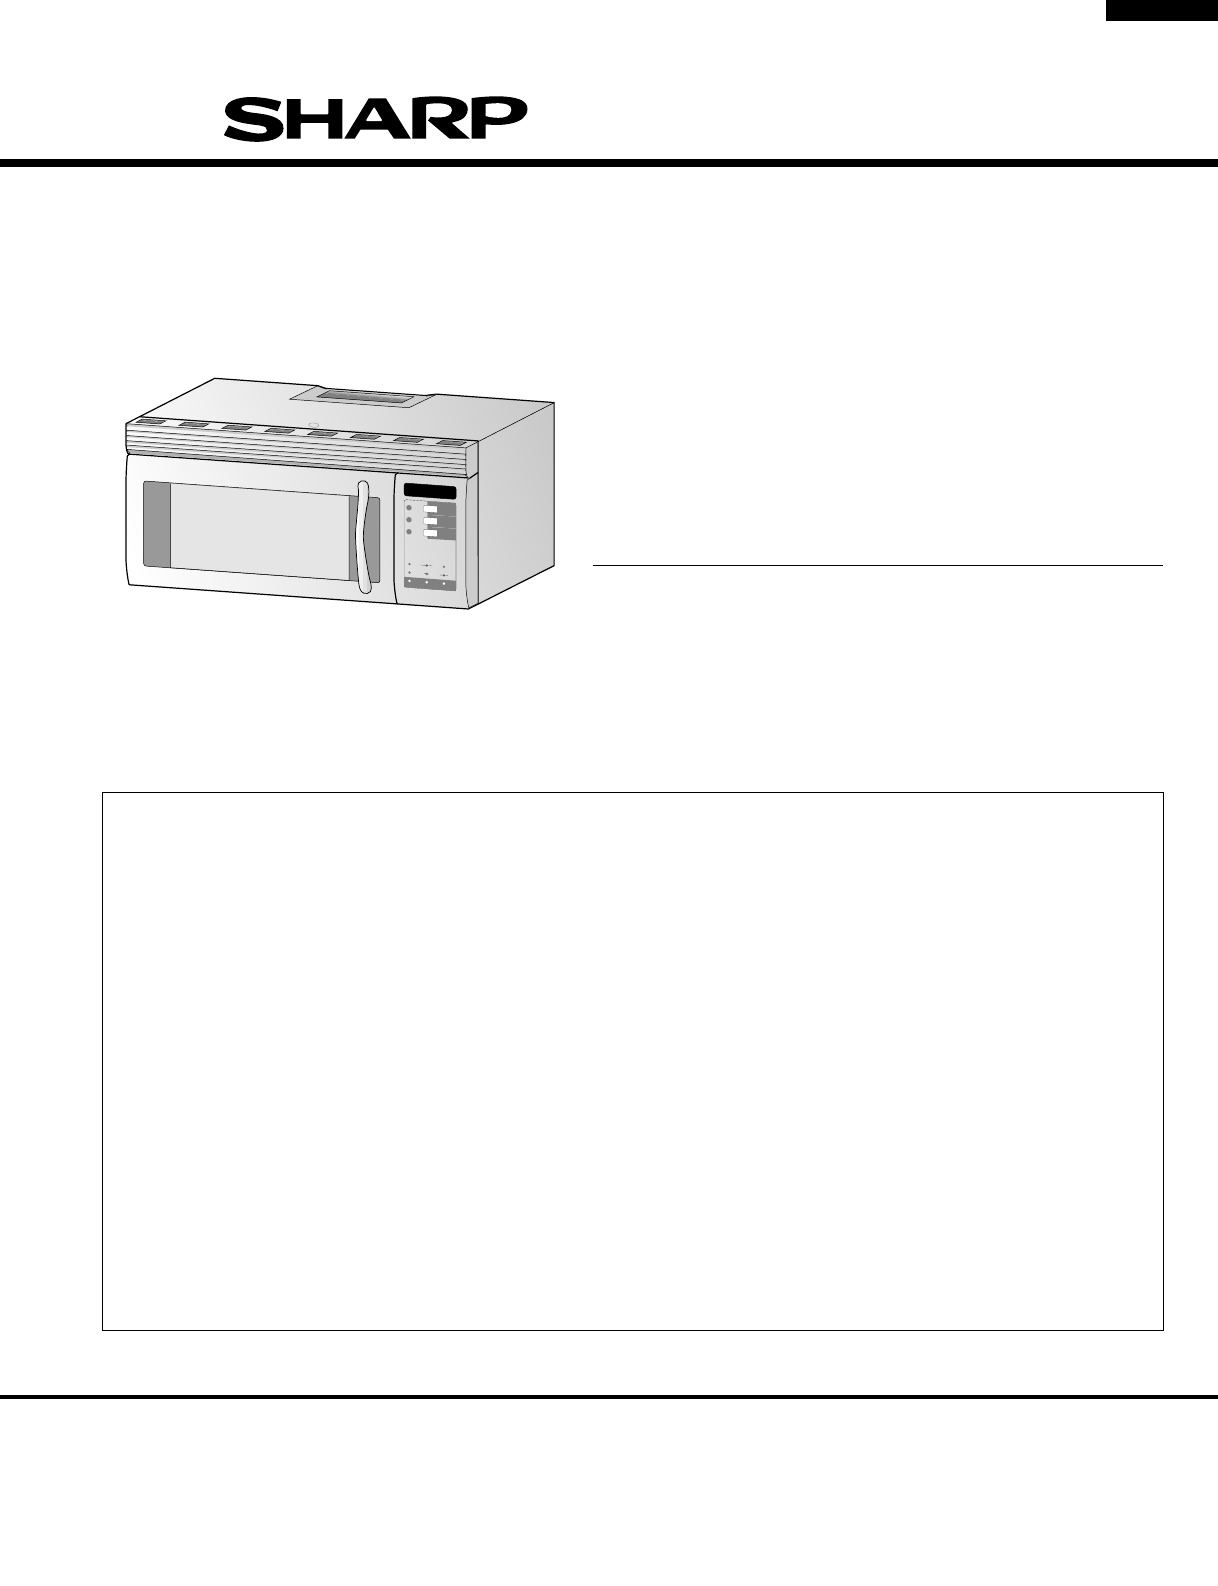 Sharp microwave oven r202zs user manual pdf